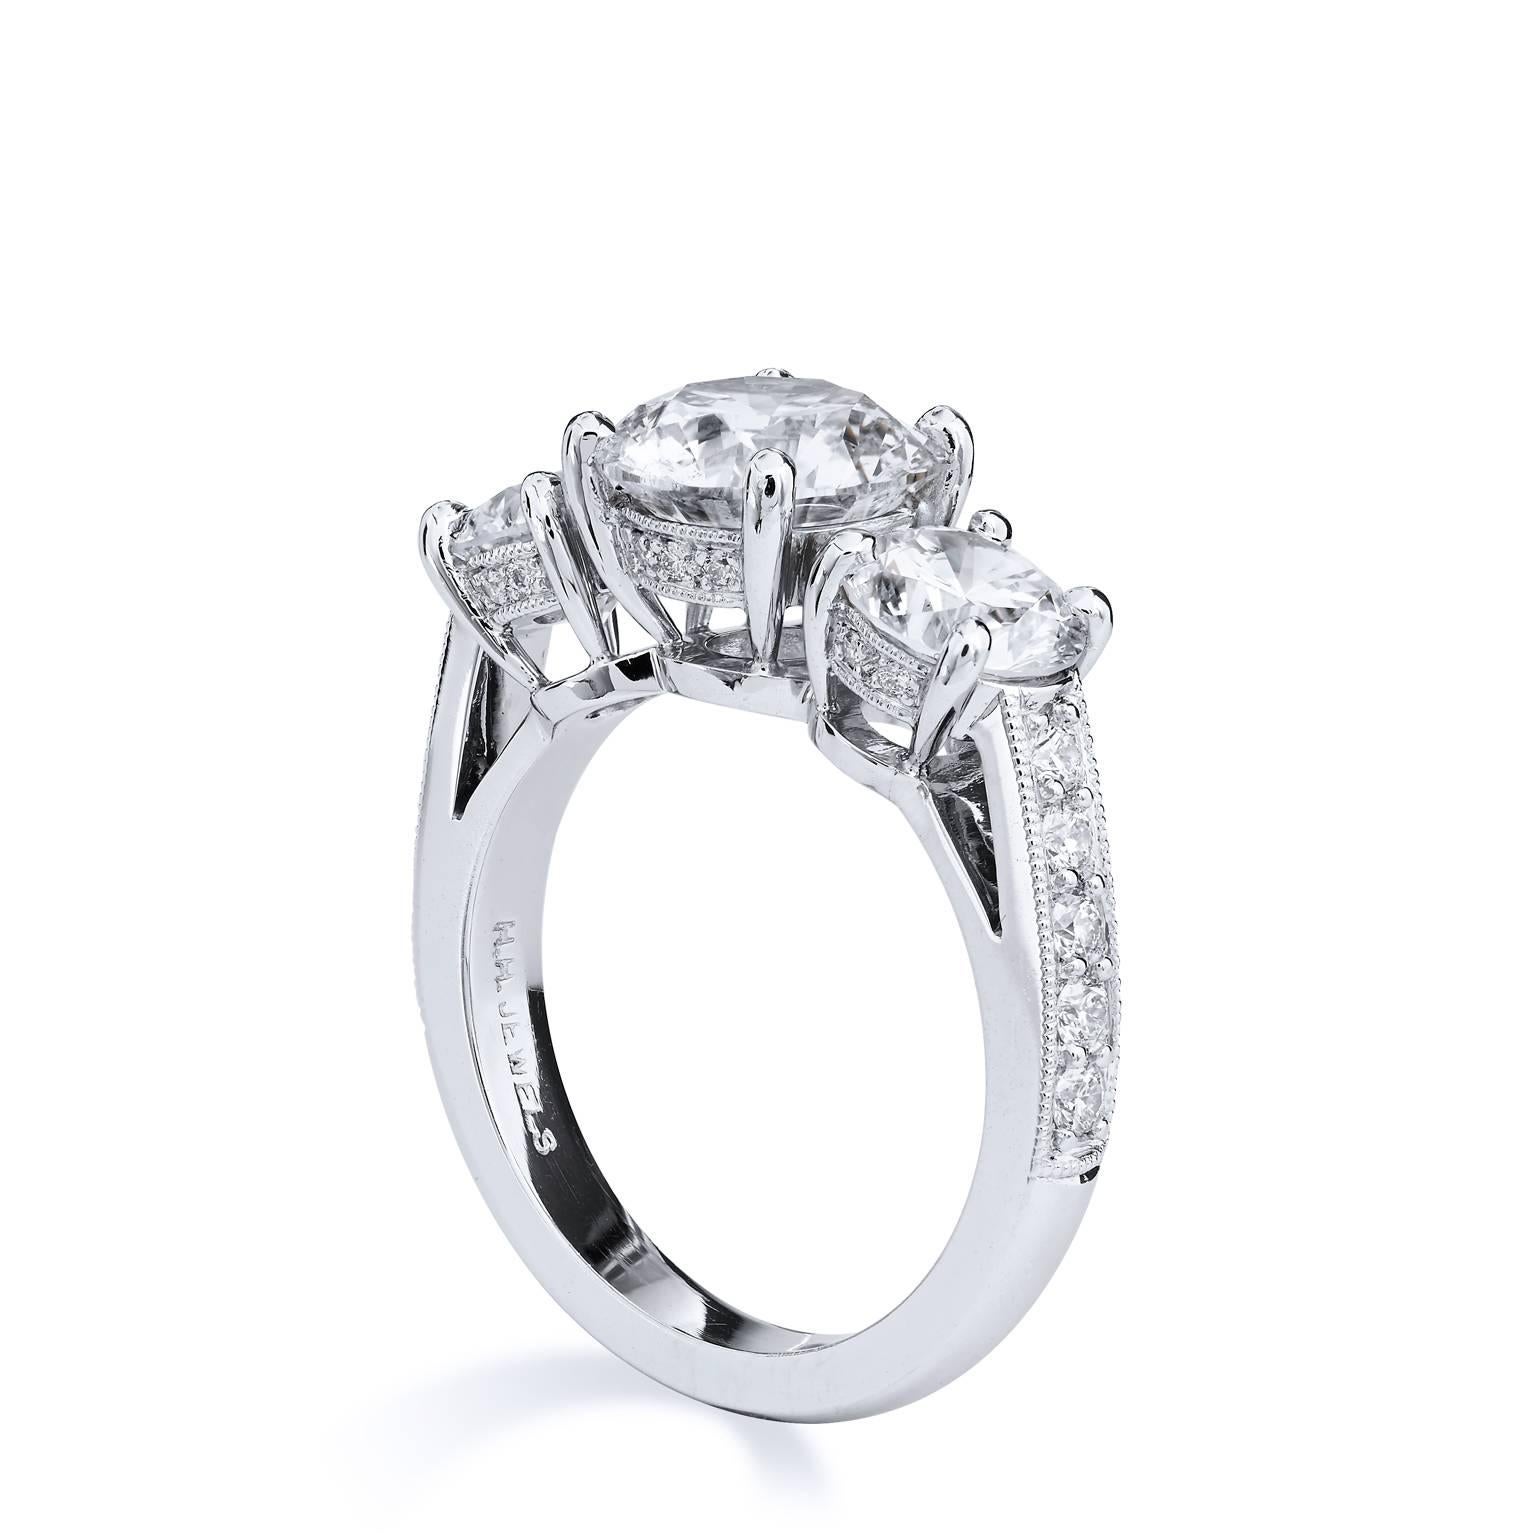 Embody the radiance of an angel in this diamond and platinum ring. A 2.34 ct GIA certified diamond (J/ SI2- GIA# 5121502339) sits at center while two shimmering 1.80 ct diamonds (K/SI1/SI2) adjoin at both sides of the center diamond as 14 pieces of